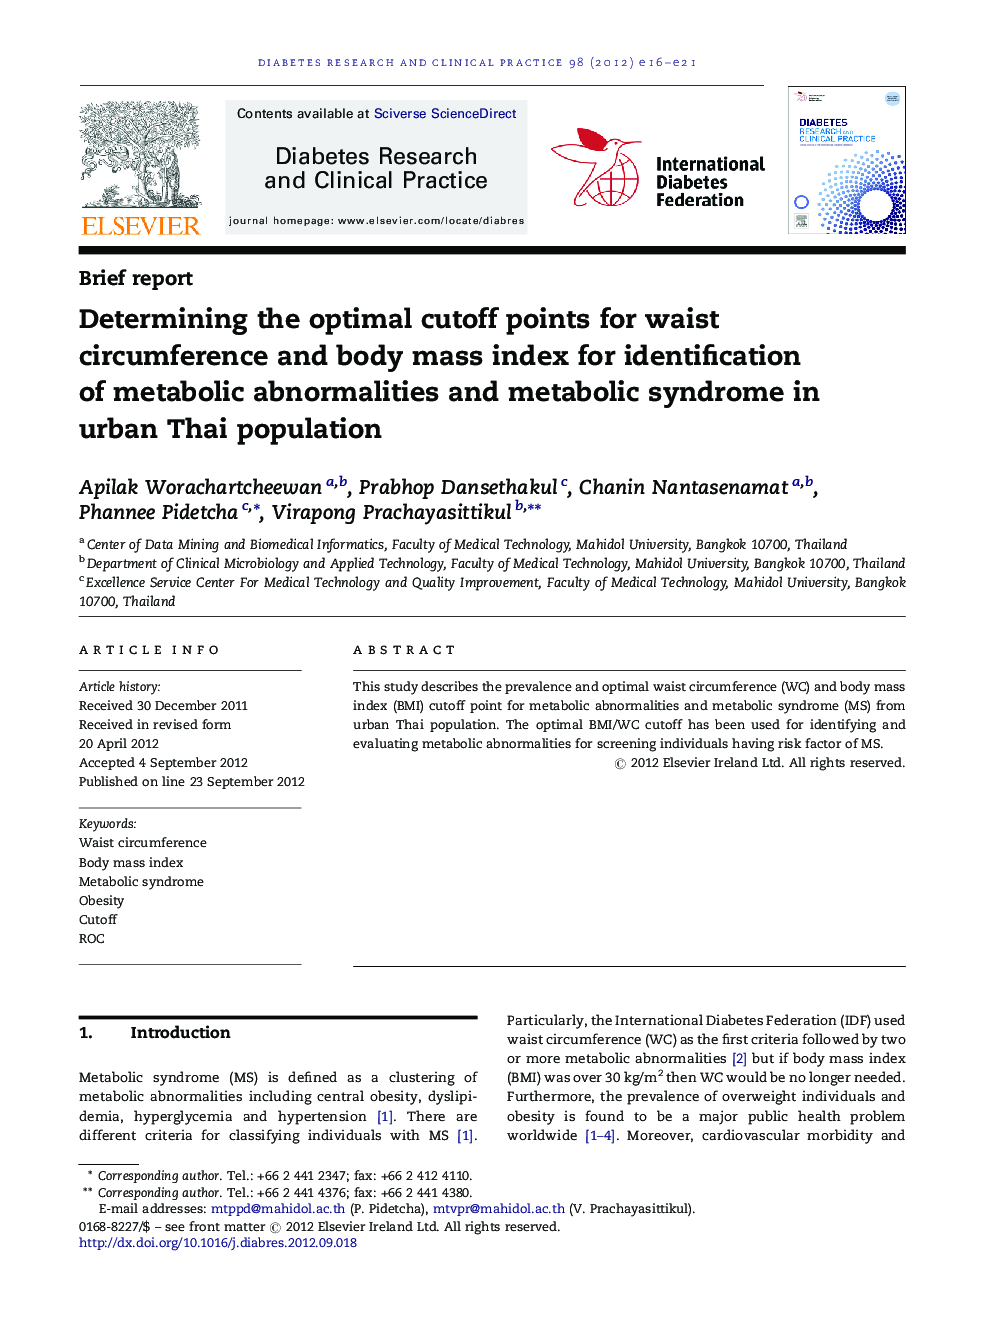 Determining the optimal cutoff points for waist circumference and body mass index for identification of metabolic abnormalities and metabolic syndrome in urban Thai population